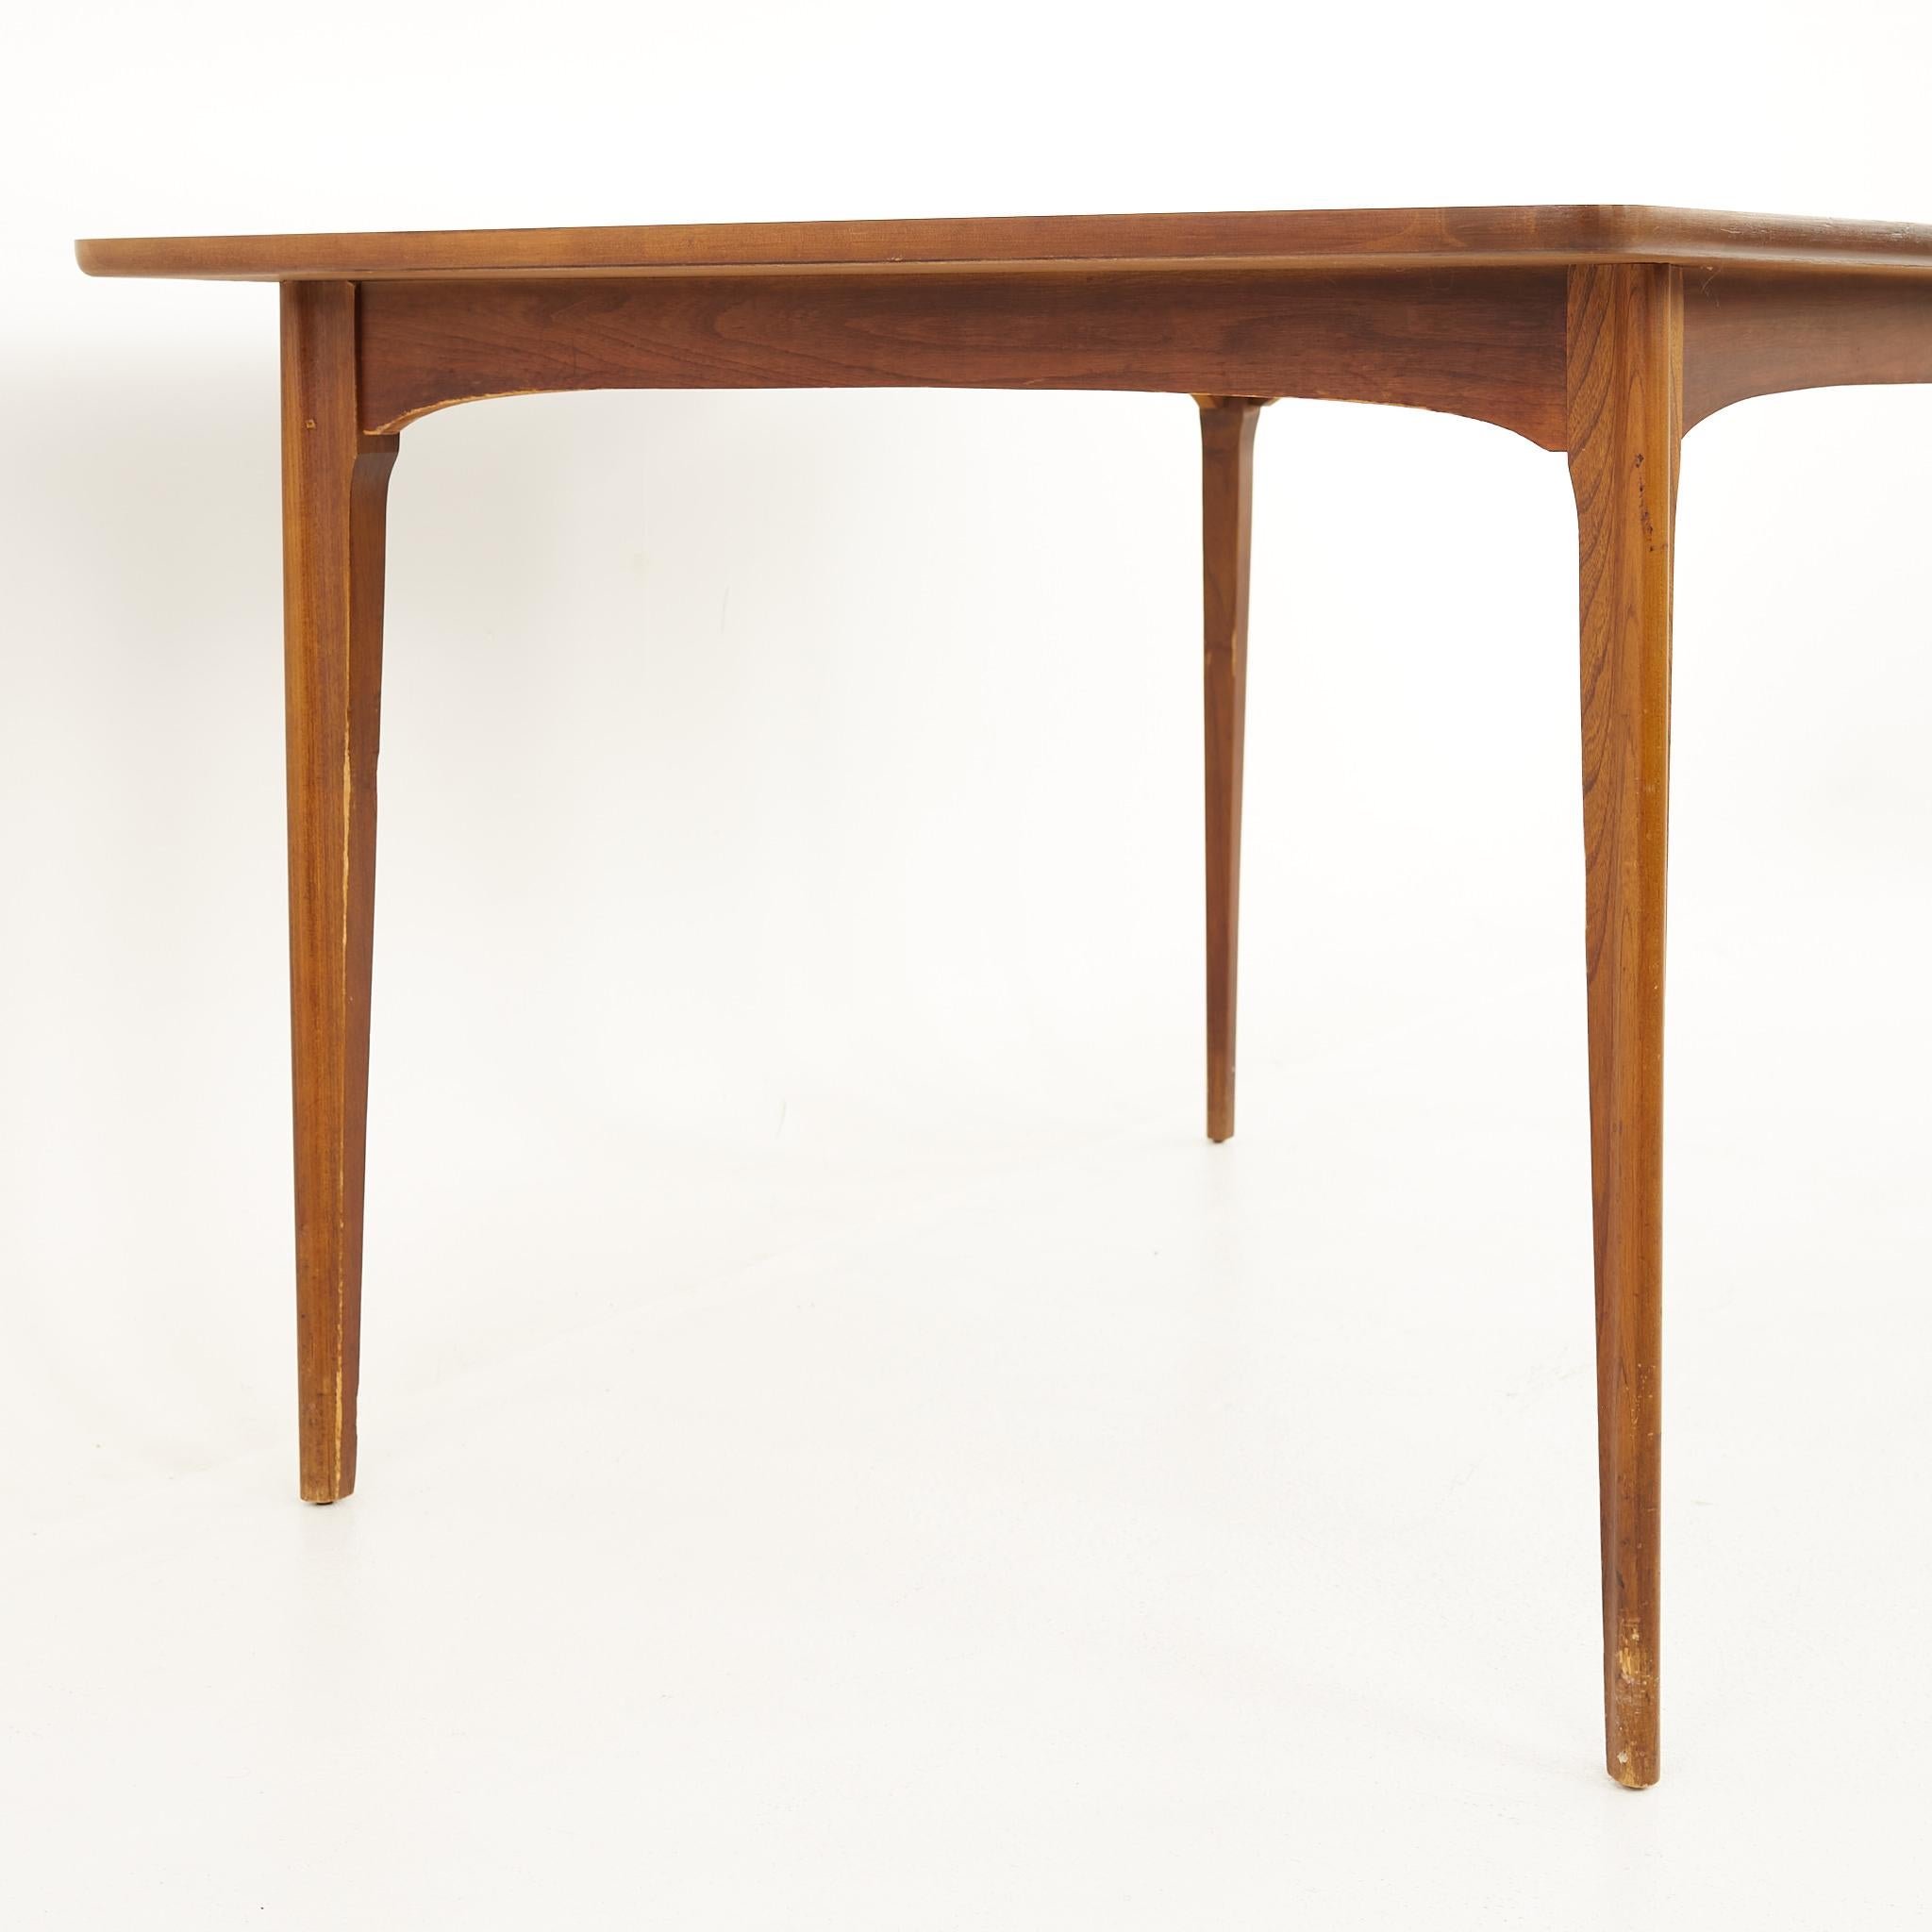 Late 20th Century Kent Coffey Perspecta Mid Century Walnut Surfboard Dining Table For Sale